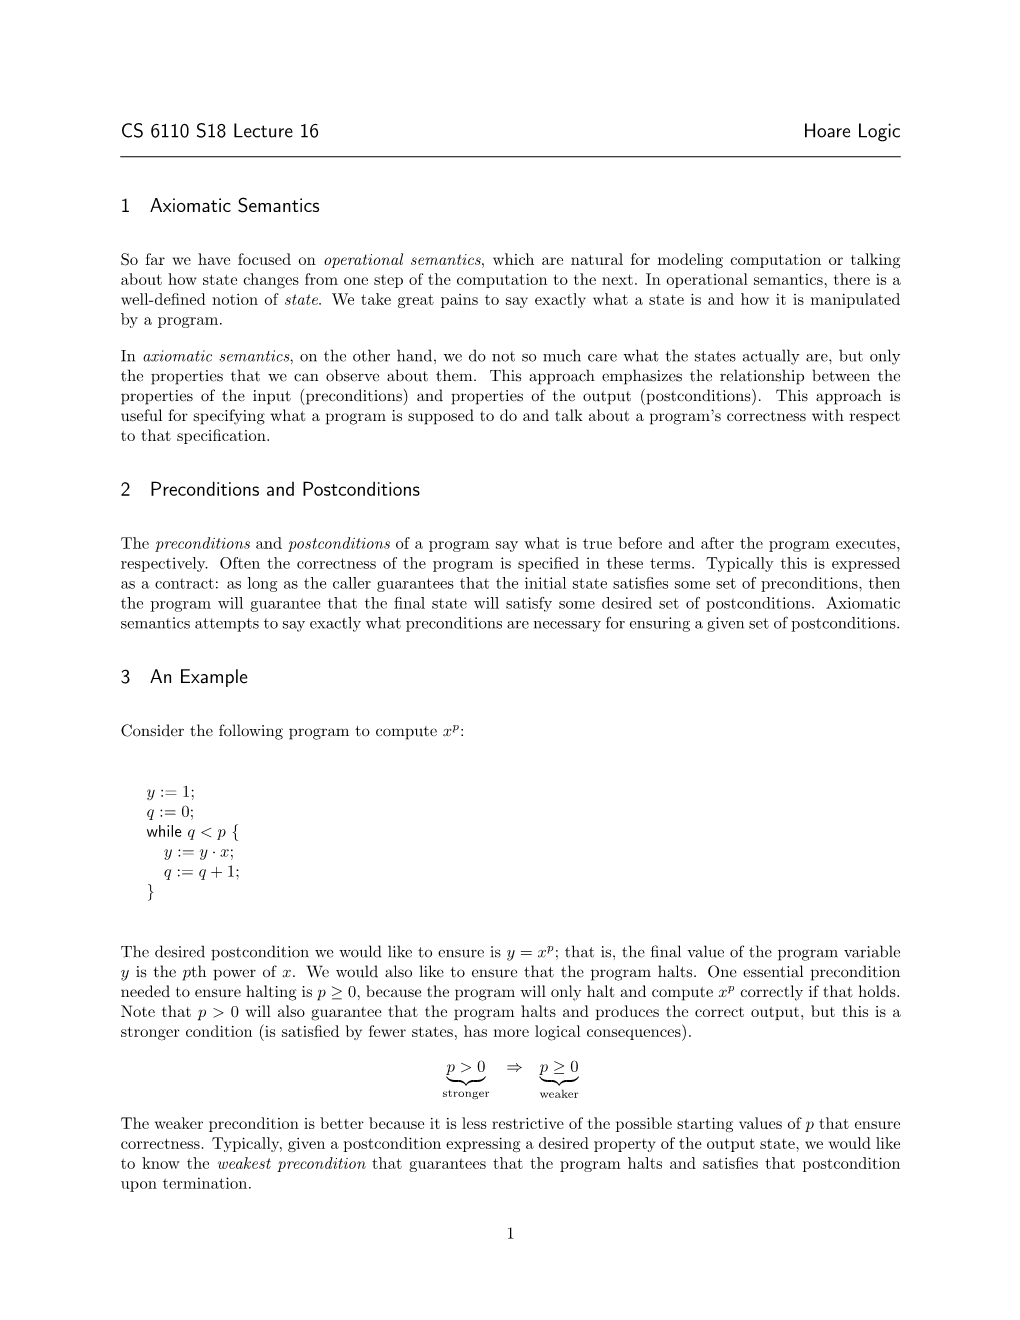 CS 6110 S18 Lecture 16 Hoare Logic 1 Axiomatic Semantics 2 Preconditions and Postconditions 3 an Example